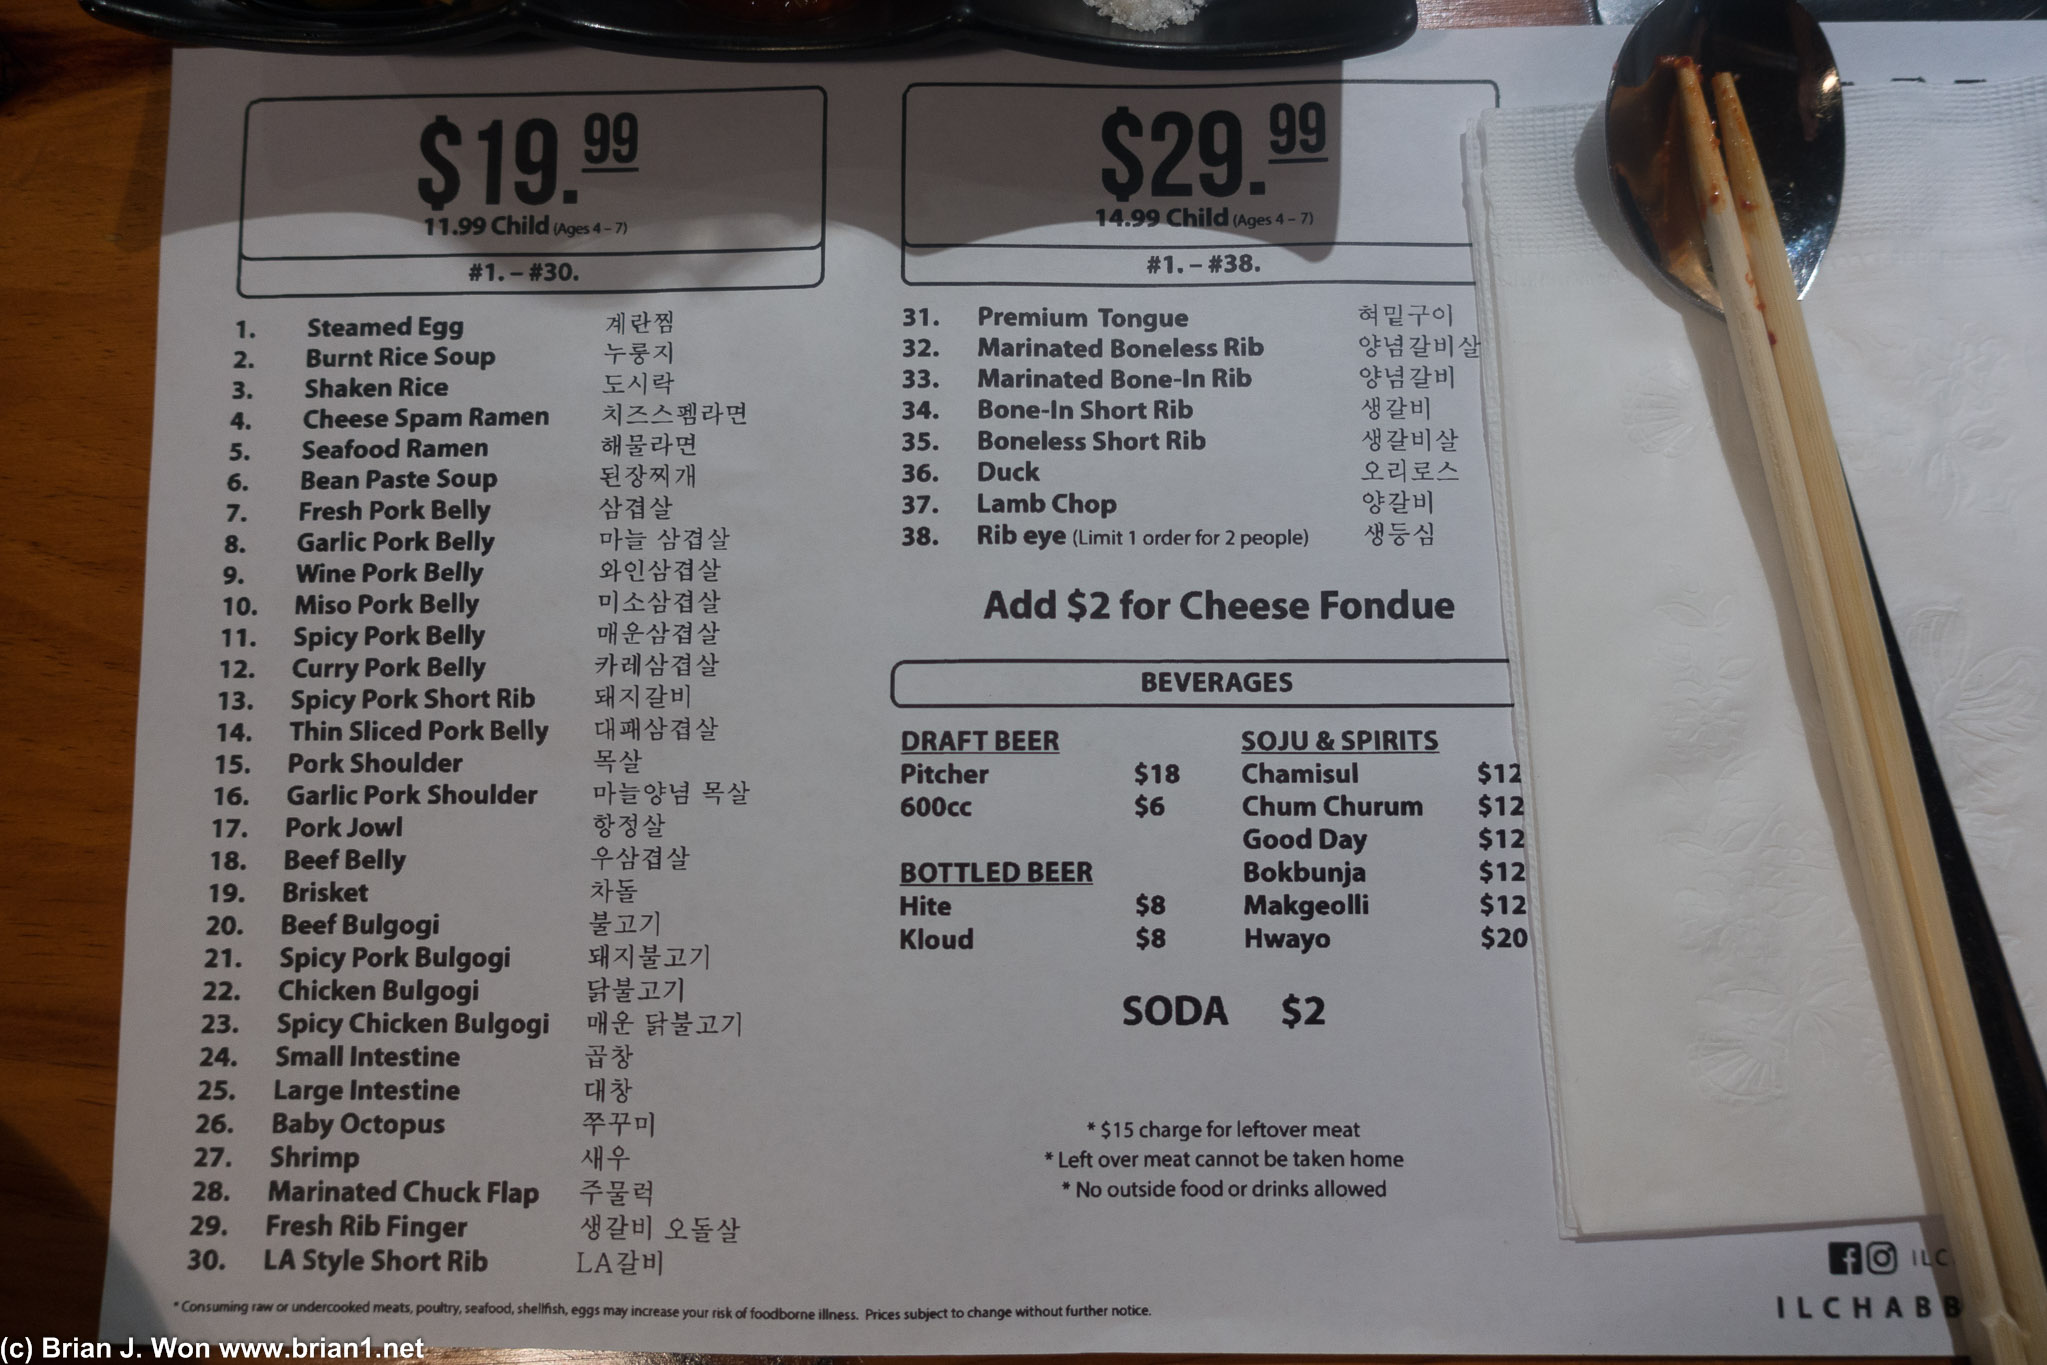 We did the $19.99 menu. Actually it was $16.99 since we showed up before 6pm!